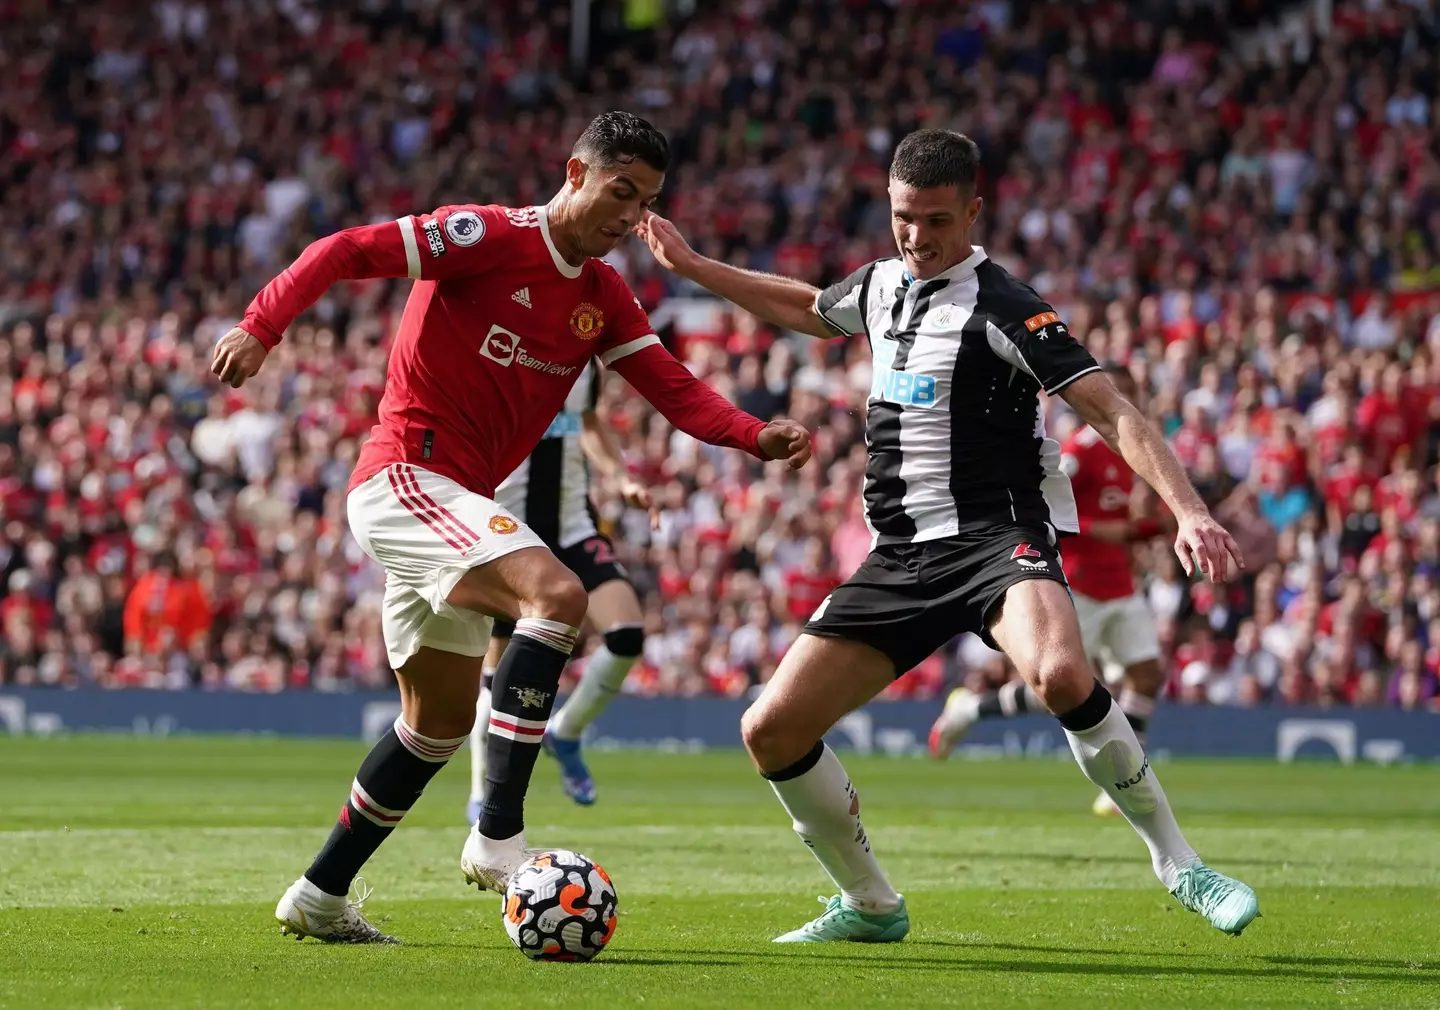 Ronaldo scored two goals against Newcastle on his second debut for Manchester United